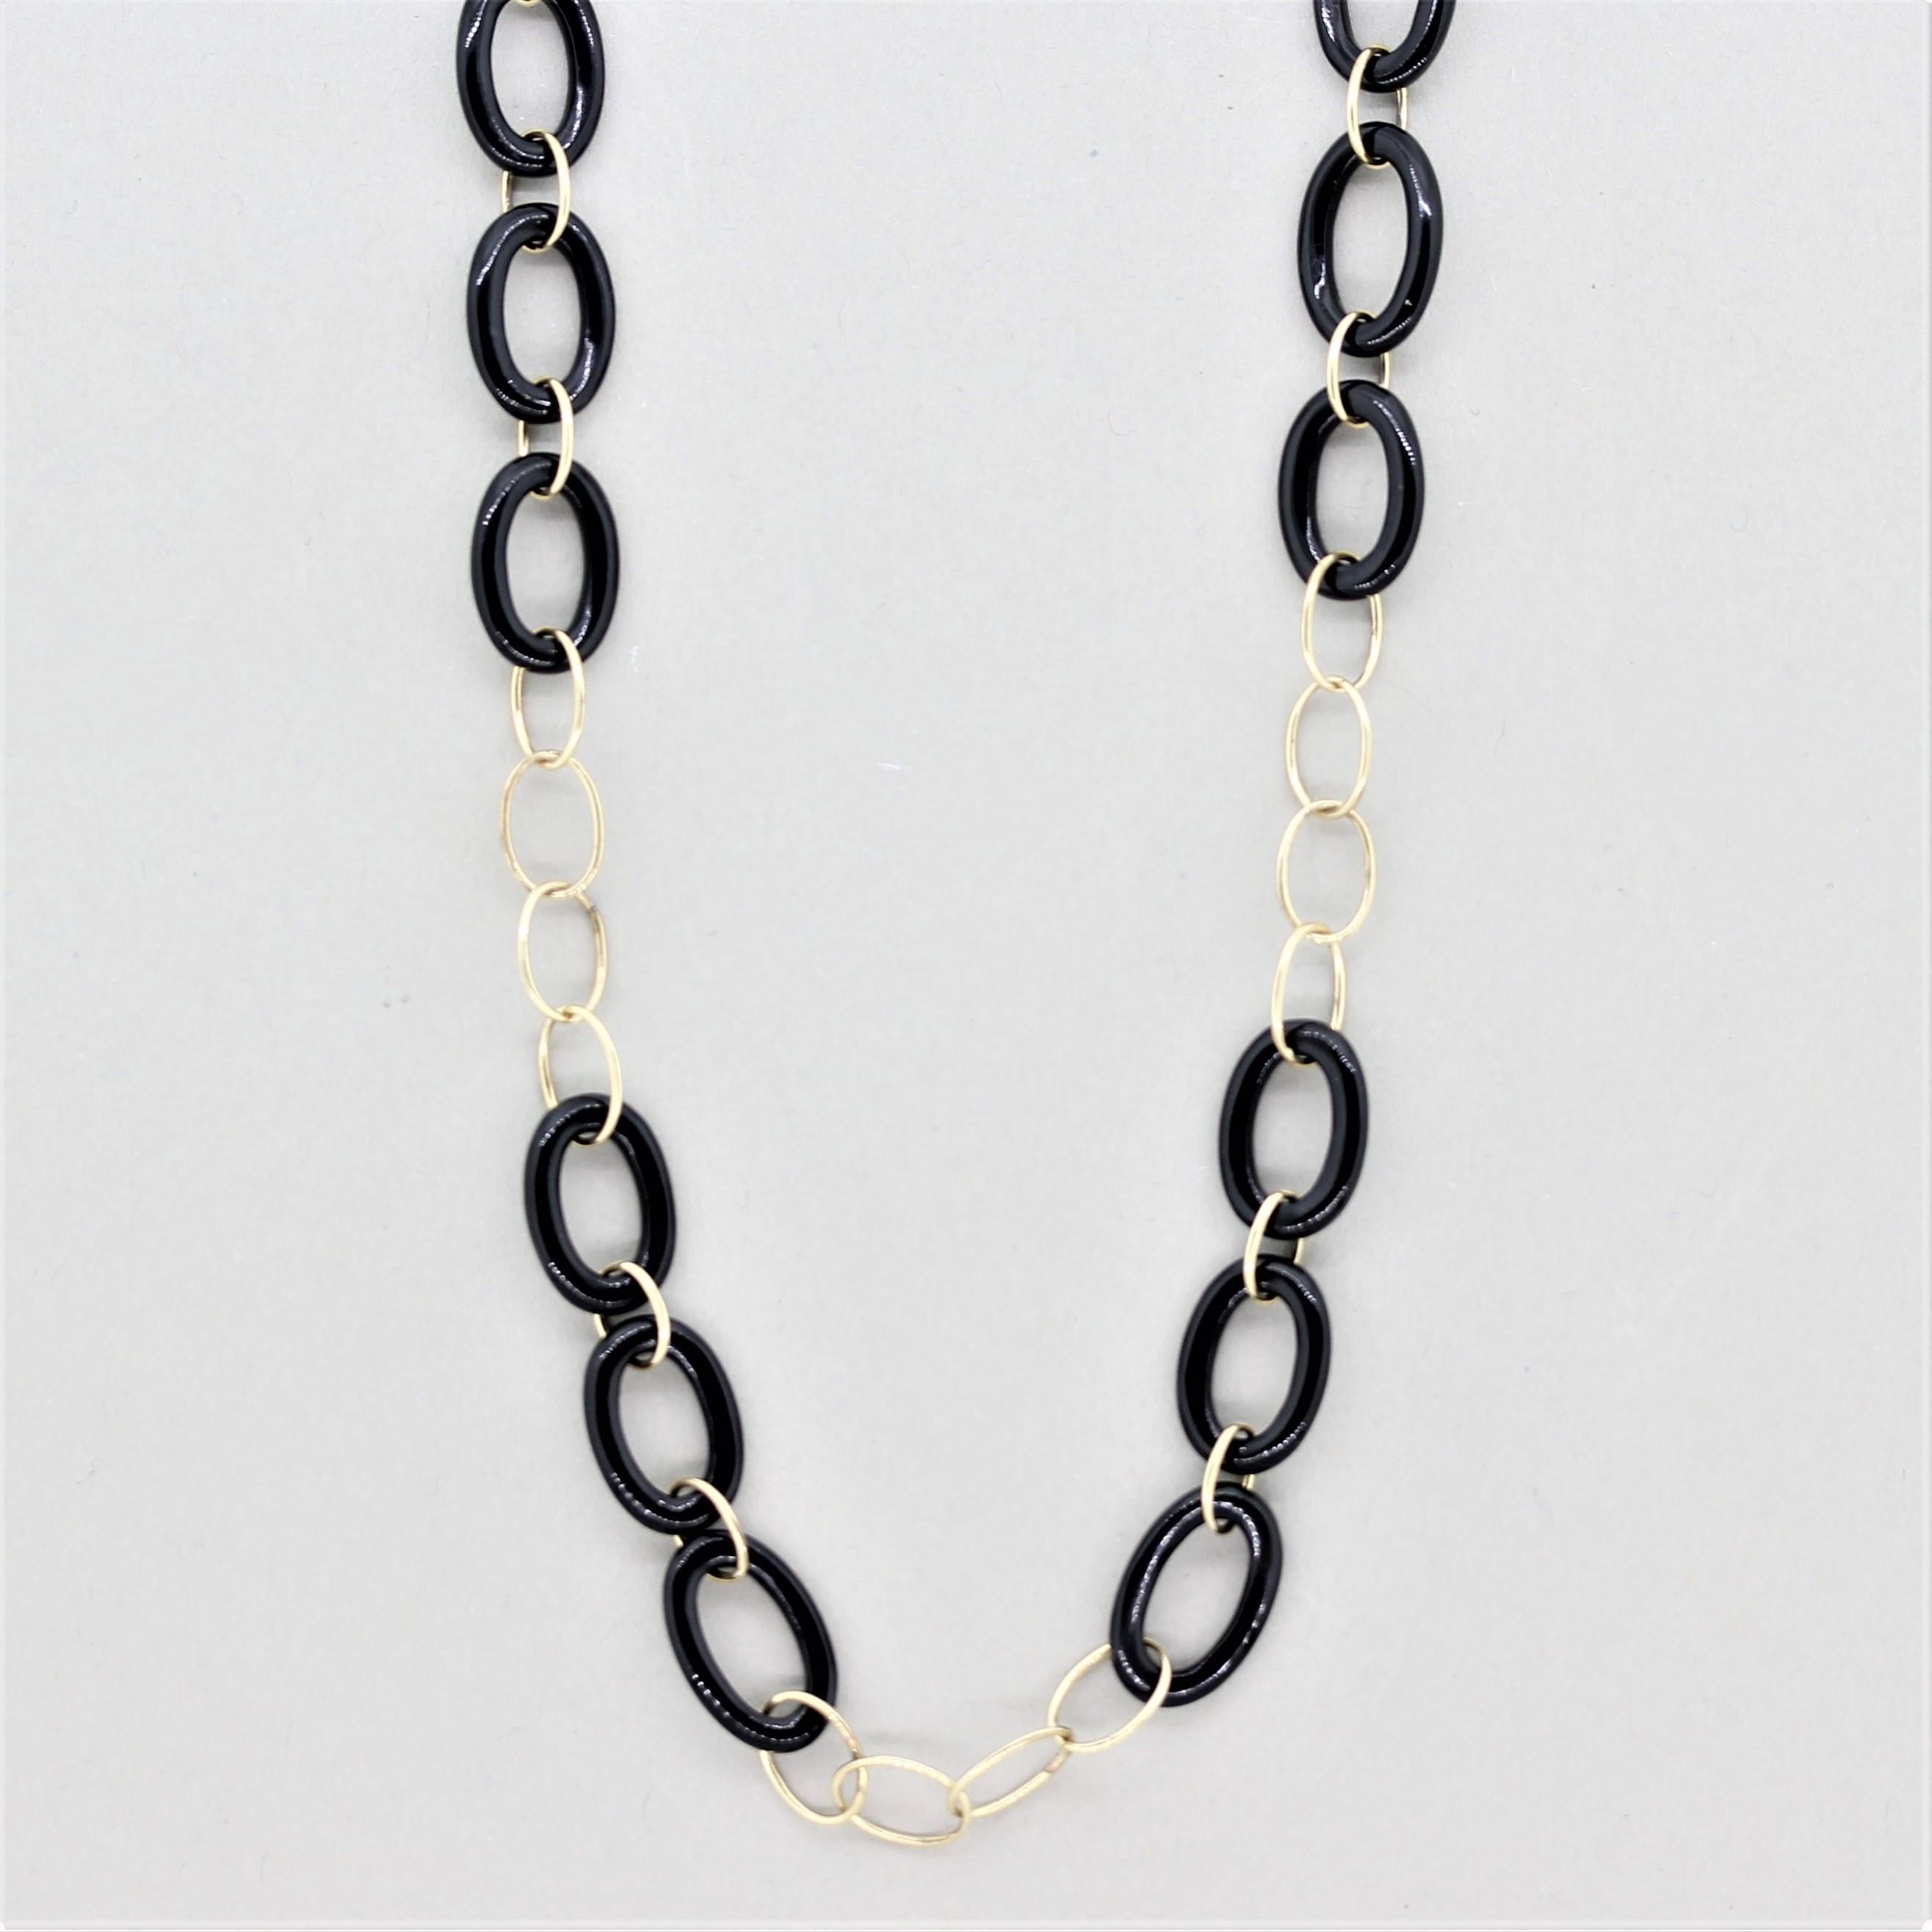 A simple yet chic necklace that can be worn daily! It is made of hoops of 14k rose gold and black onyx which link together in a stylish pattern. Made in 14k gold, light and comfortable to be worn casually every day.

Length: 18 inches